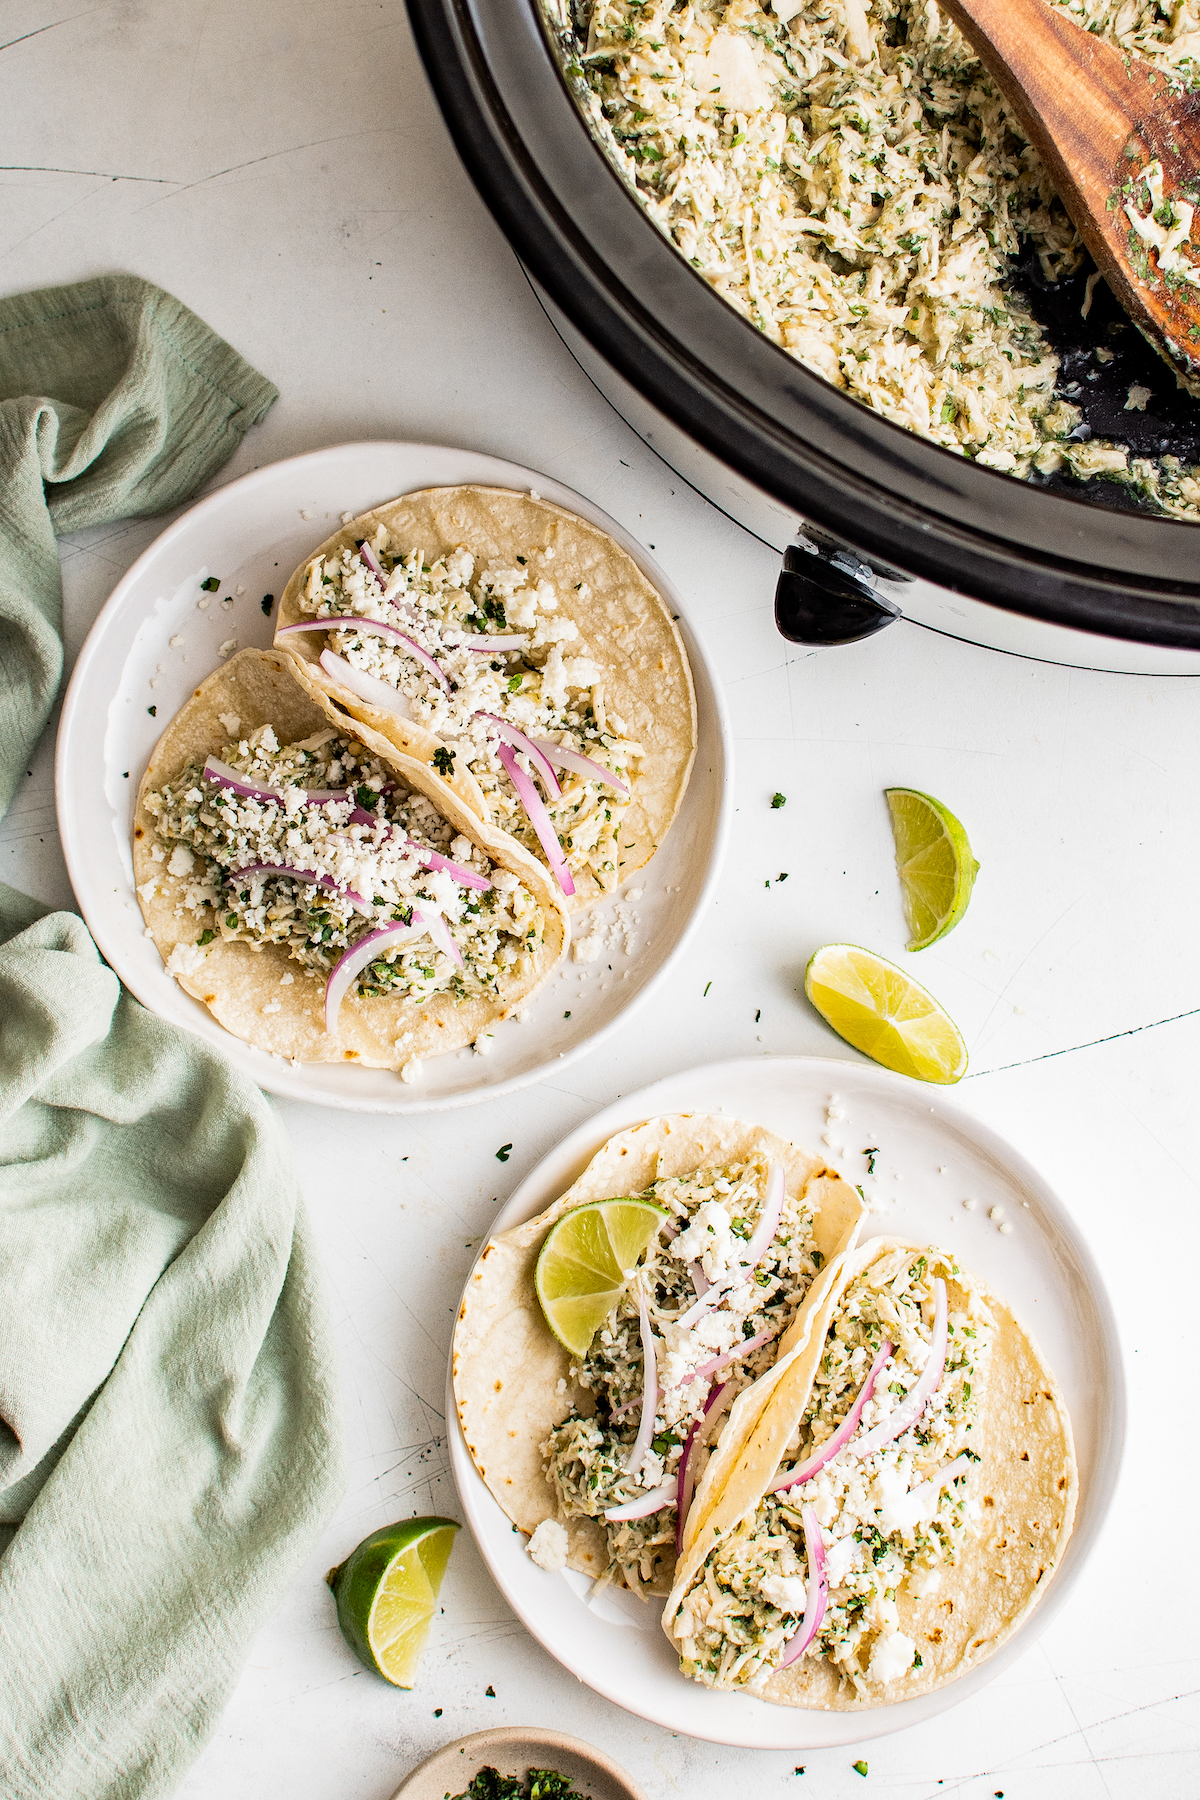 Plated salsa verde chicken tacos with toppings, next to a slow cooker insert with more salsa verde chicken inside.